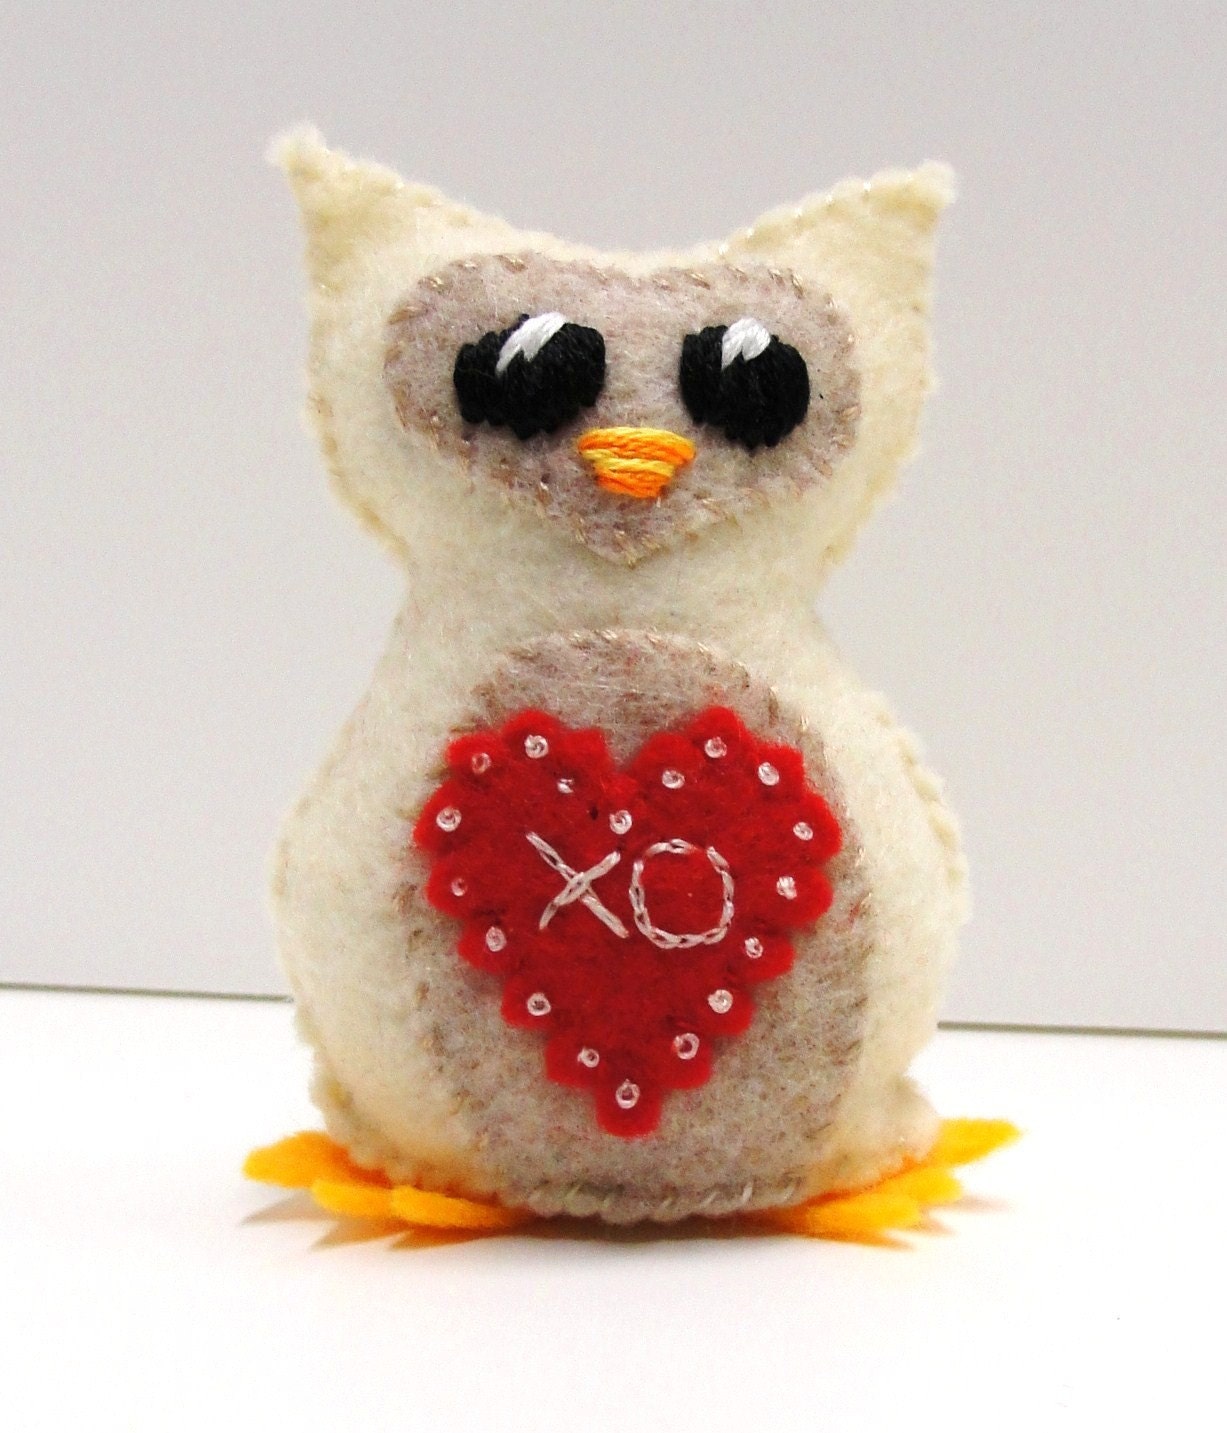 felt owl- stuffed wee feltie owlet  for Valentine's Day in winter white with "XO" bright red heart